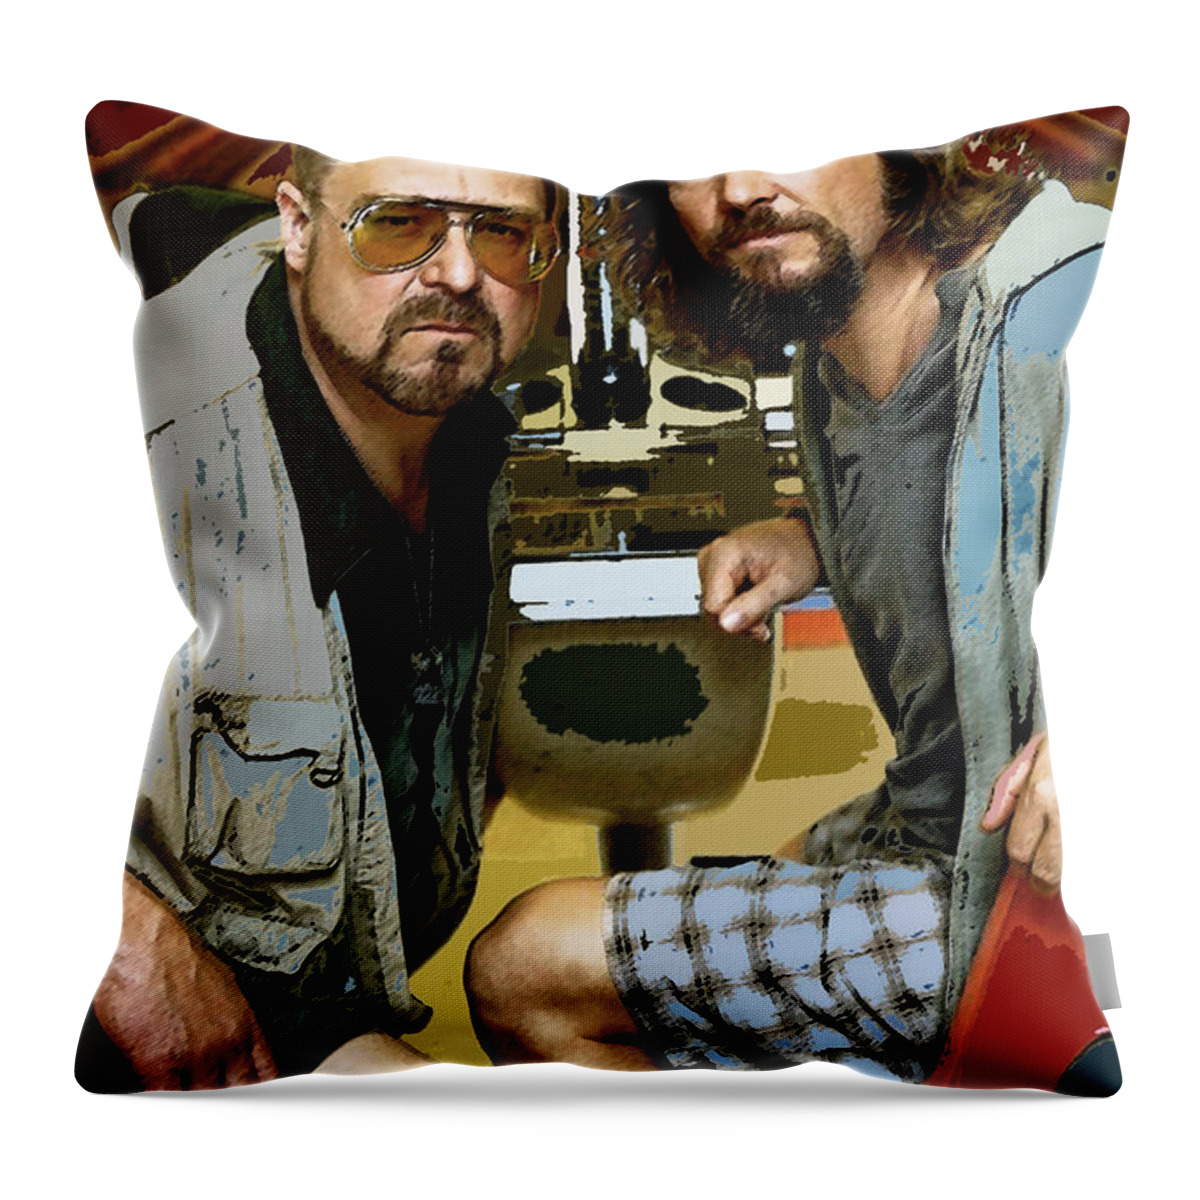 The Dude Abides Throw Pillow featuring the mixed media The Dude Abides, The Big Lebowski by Thomas Pollart